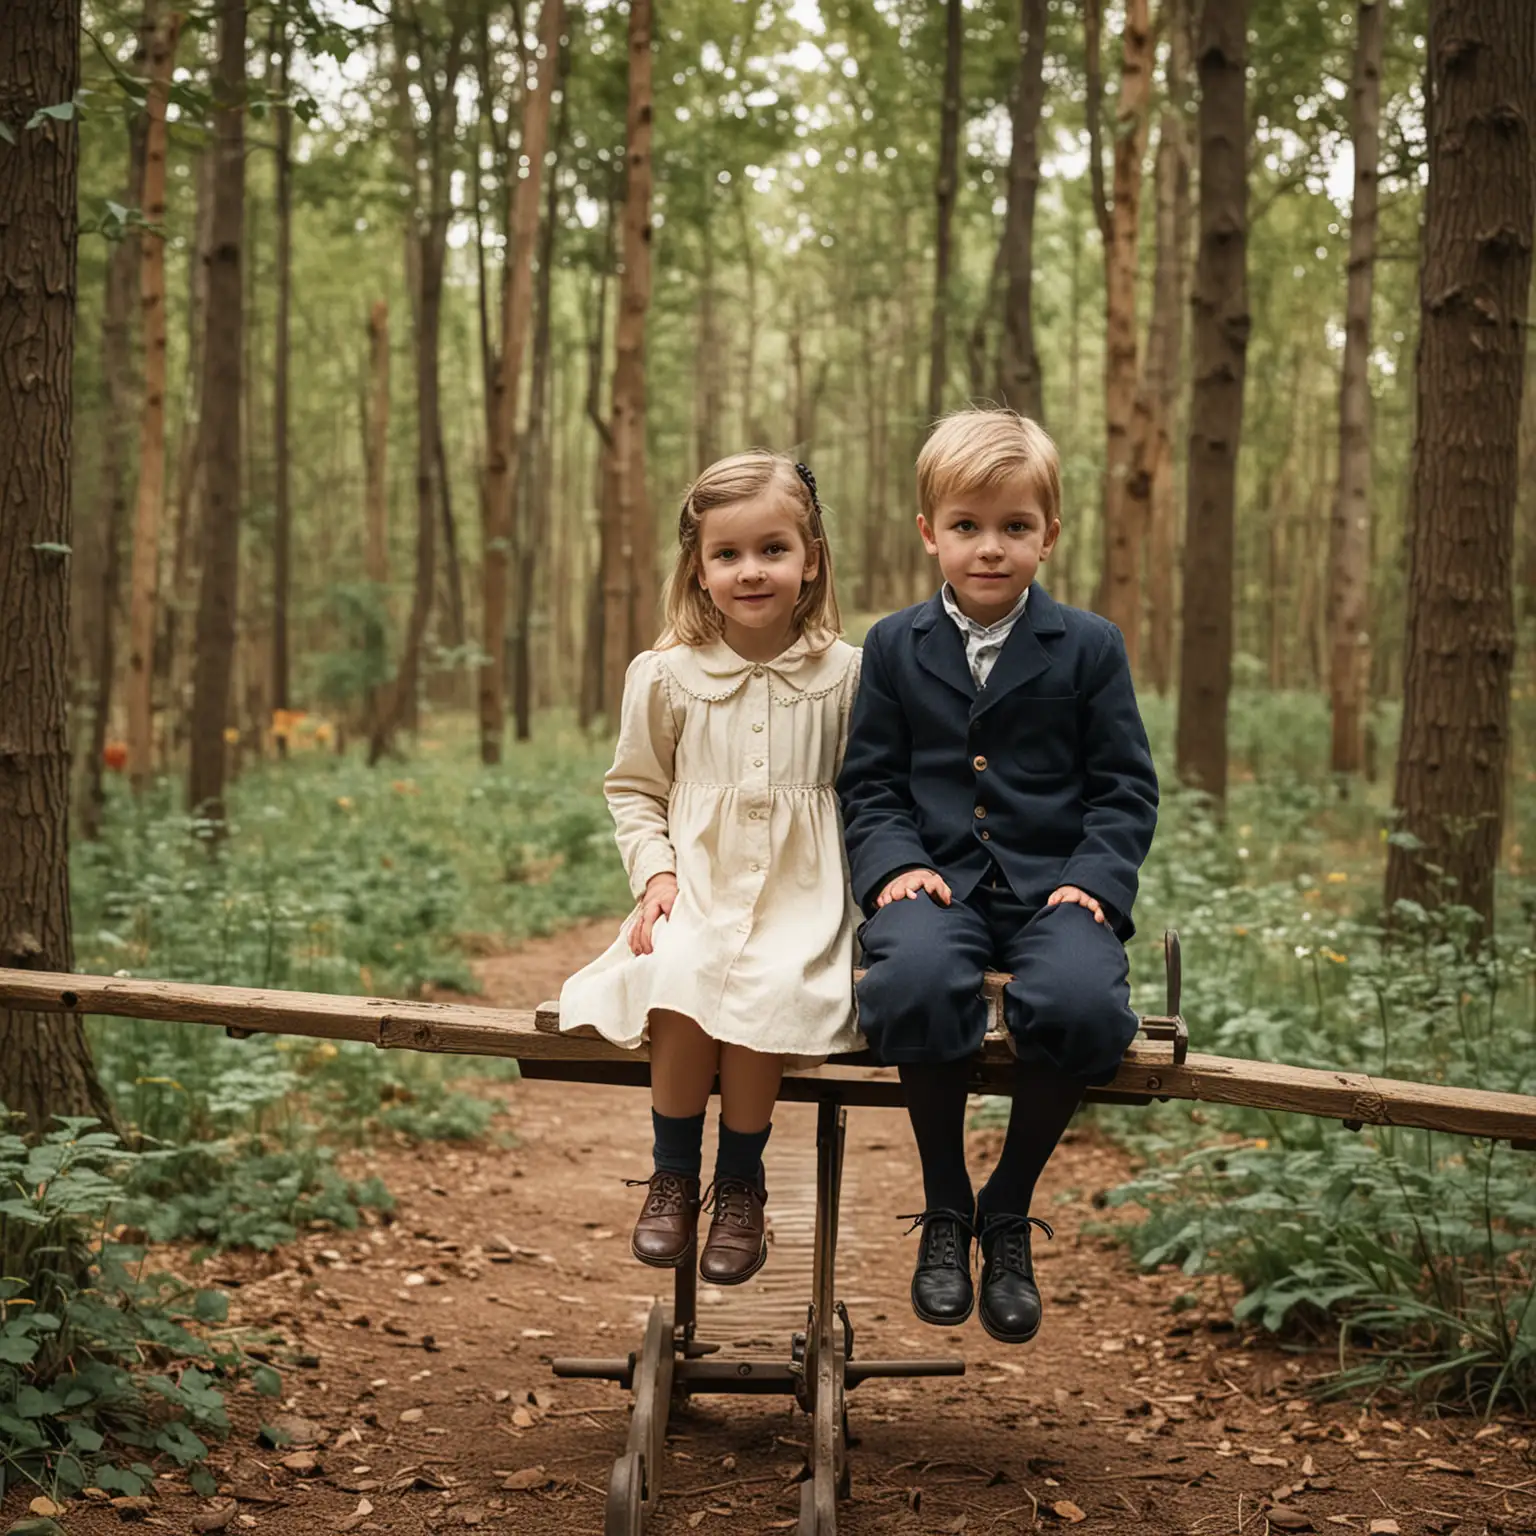 Vintage Seesaw Fun Two Children Playing in the Woods